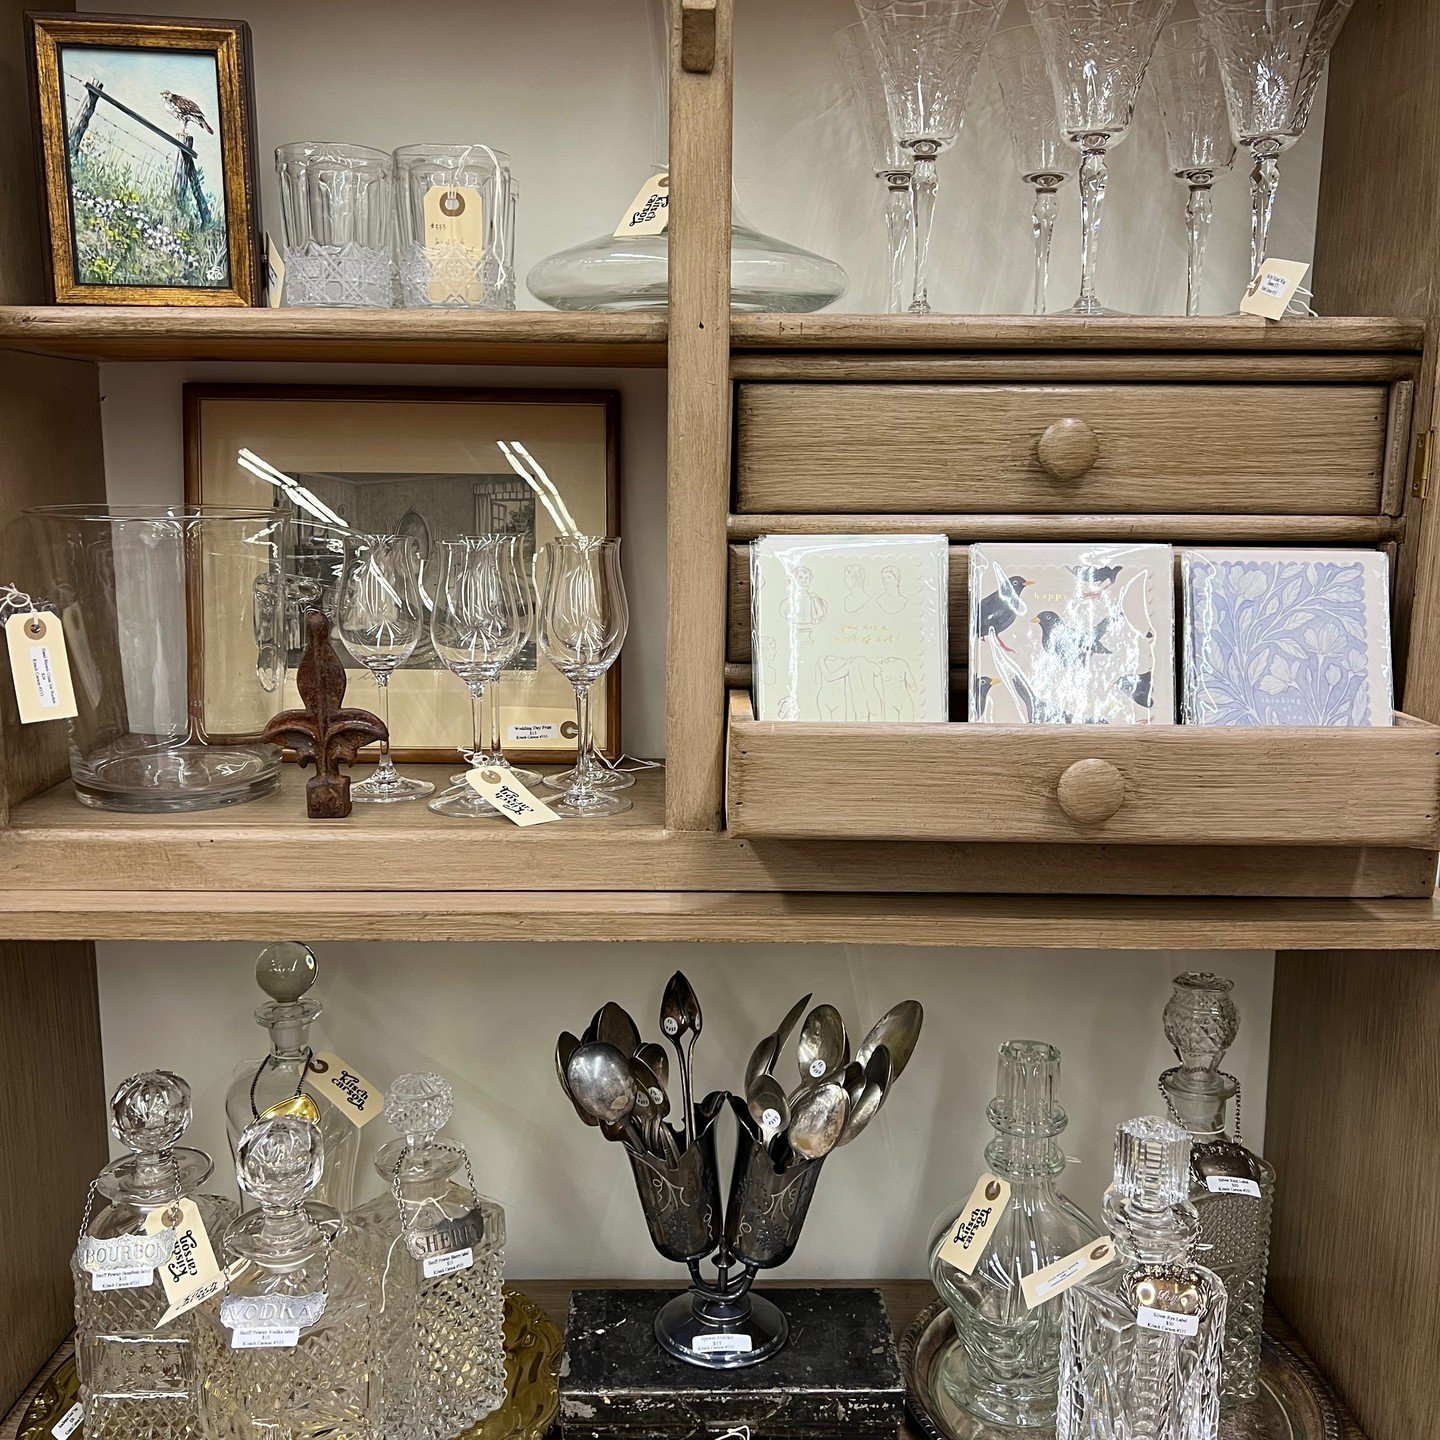 Spice up your home bar with some lovely classics. Find @kitschcarson at the Carson Antiques and Collectibles Mall, booth 51, vendor #333 #carsoncity #visitcarsoncity #cottagestyle
#farmhouse
#farmhousedecor
#farmhousestyle
#cozy
#bohostyle
#modernfar